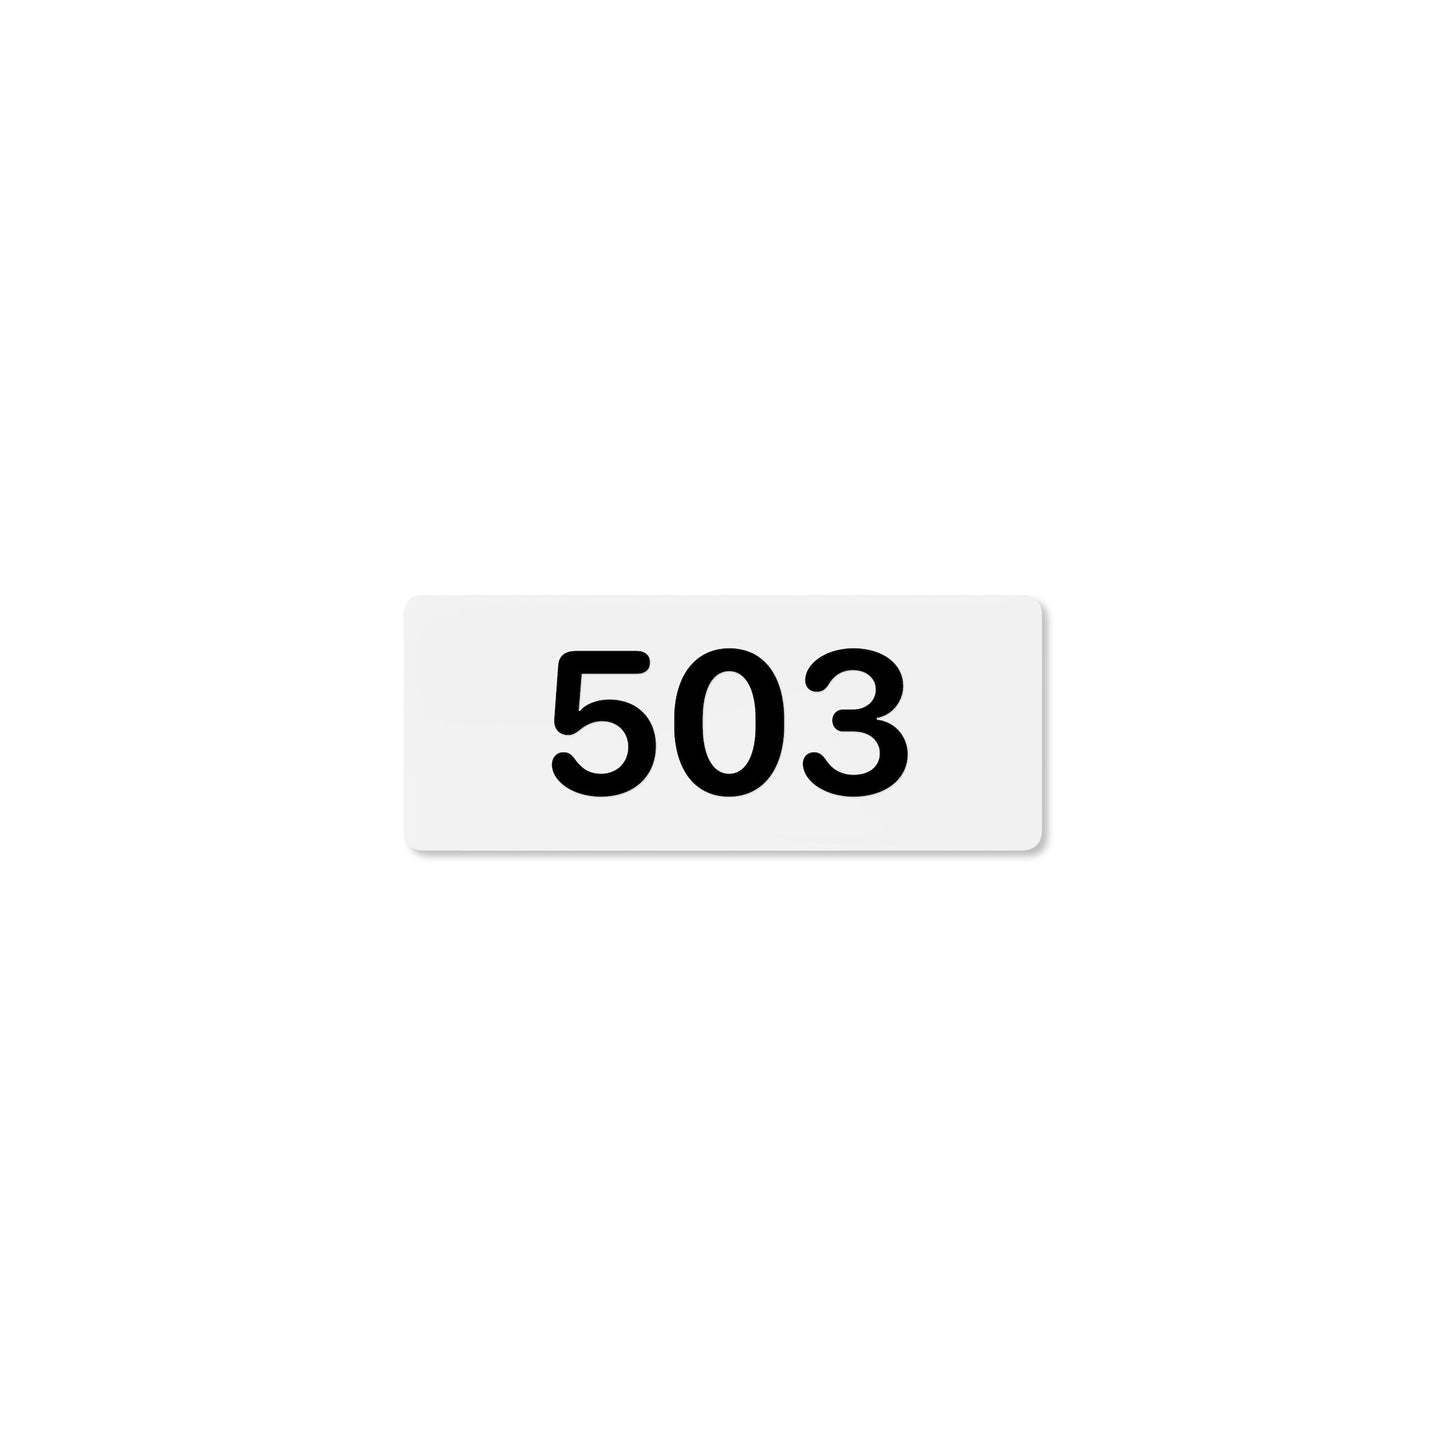 Numeral 503